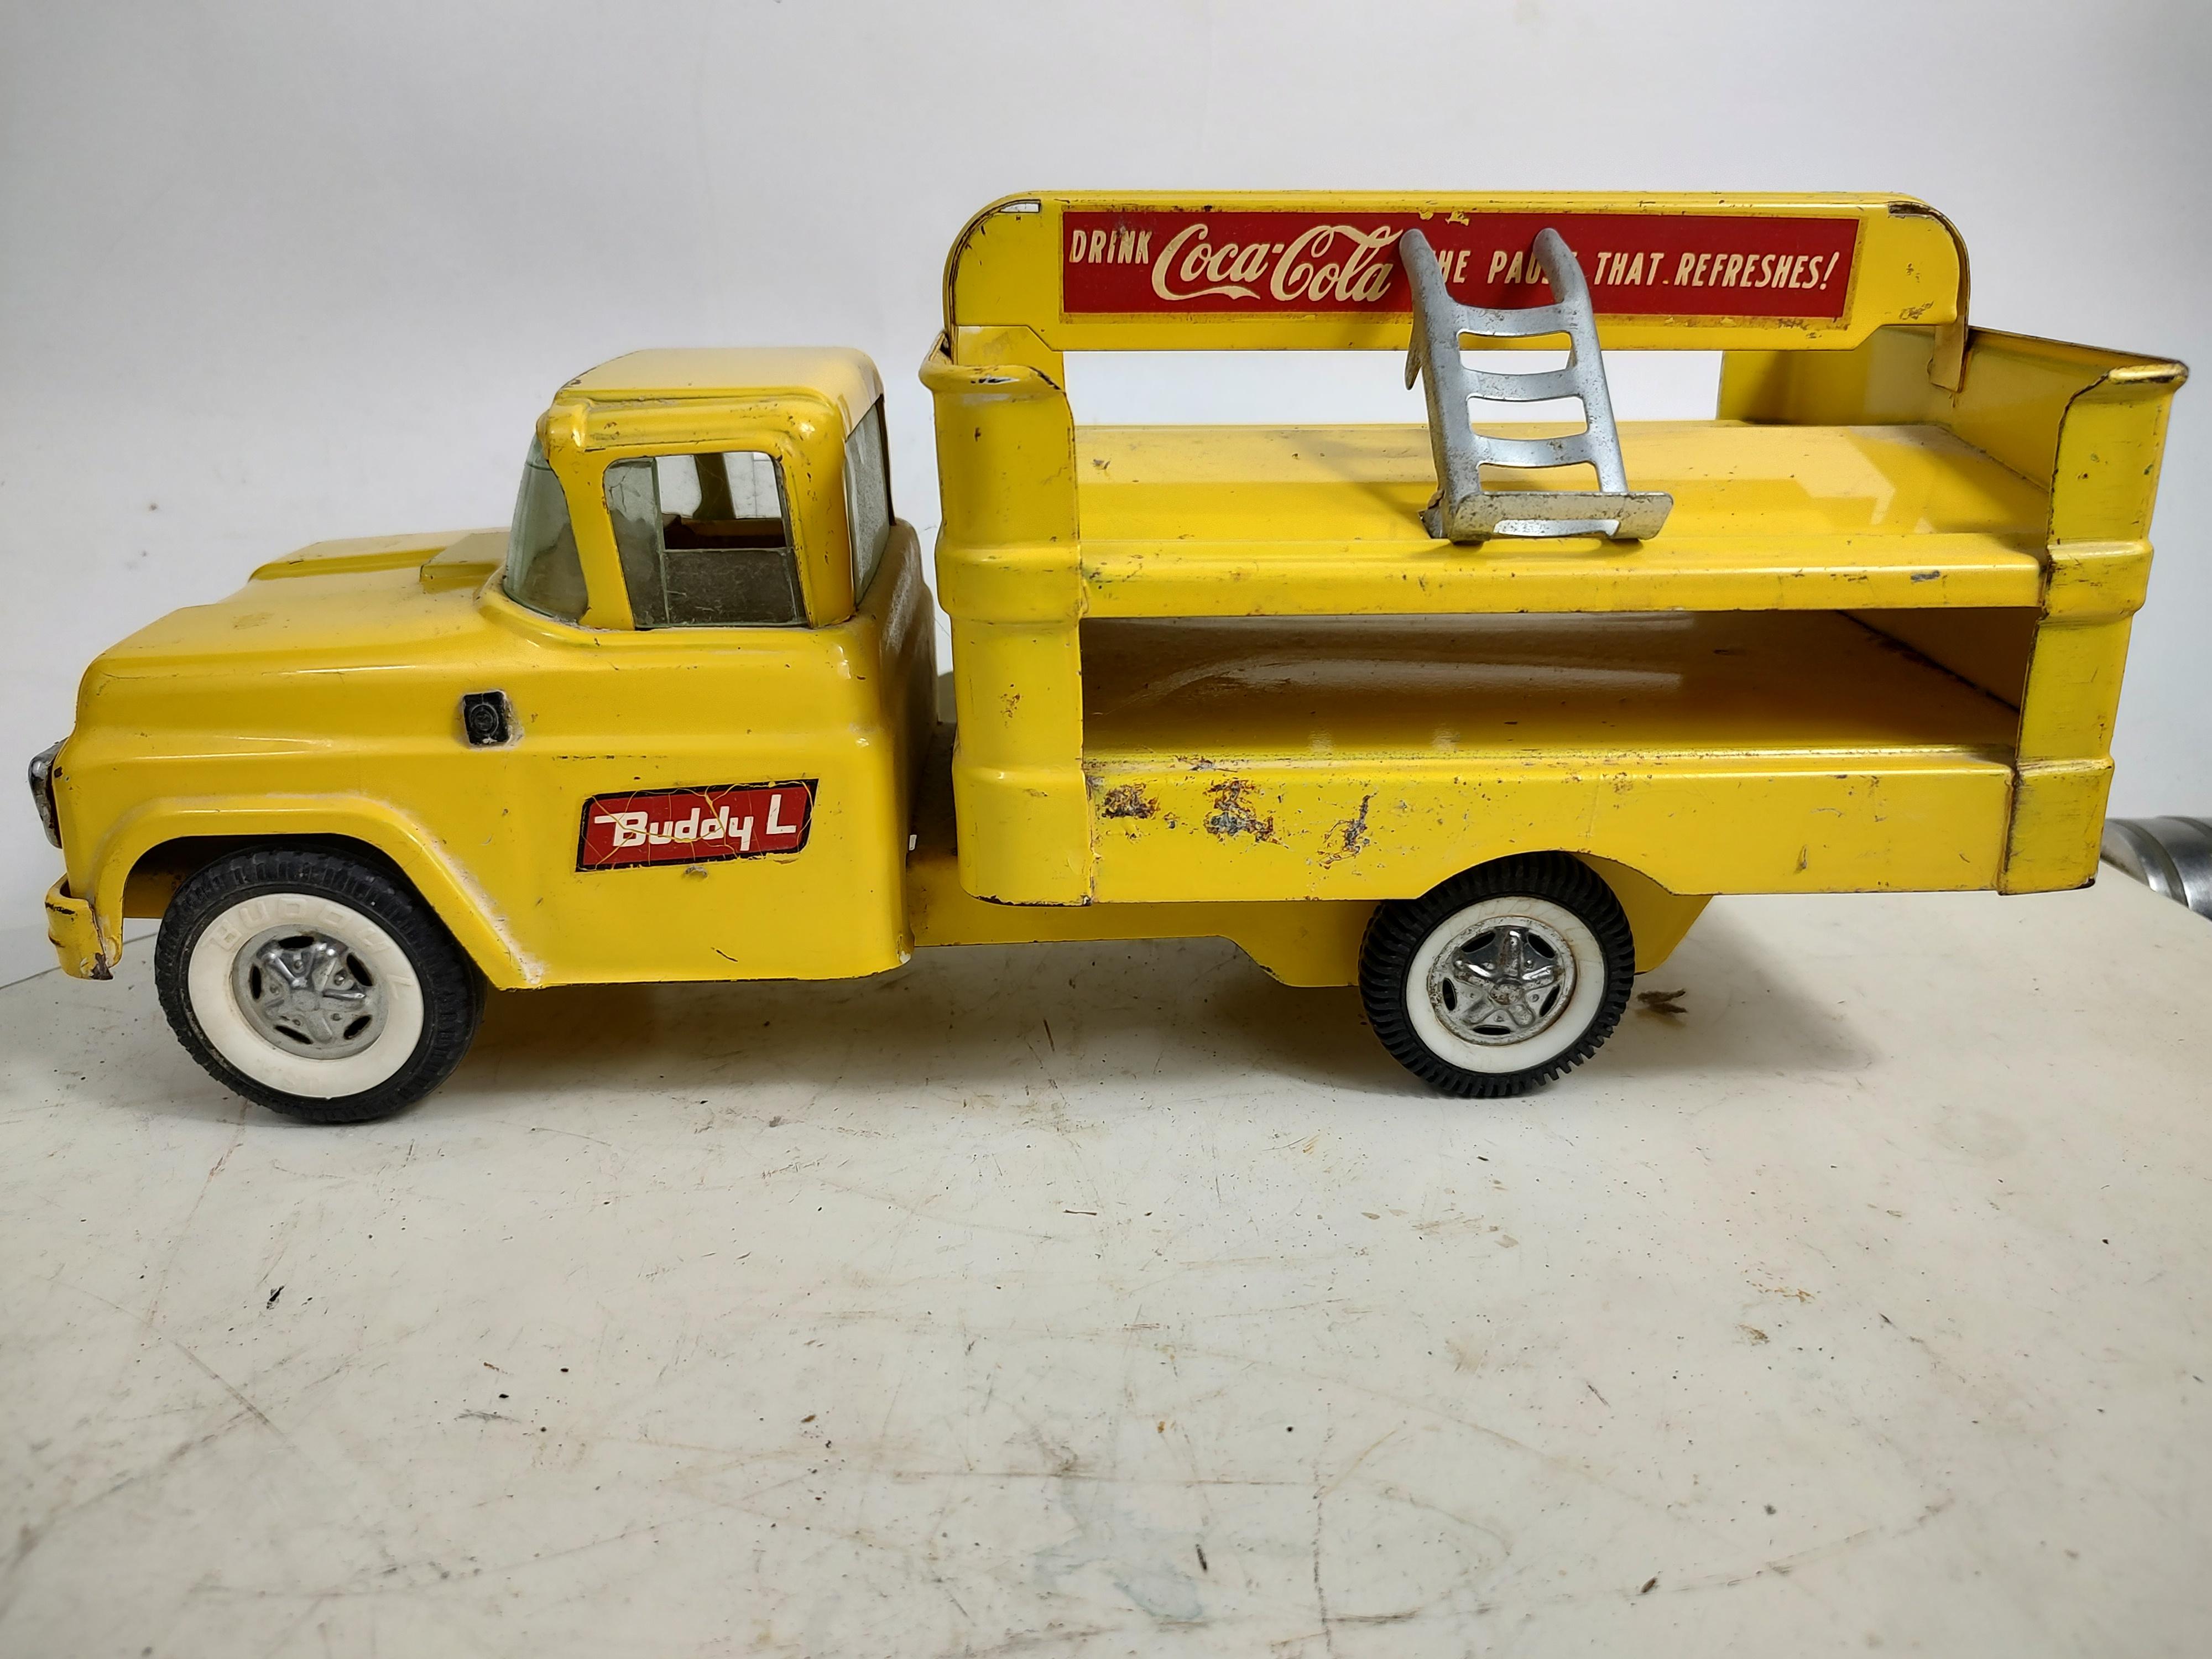 Fabulous buddy L Coca Cola delivery truck with aluminum hand truck from the late fifties early sixties. One rear tire is smaller by not much, it's a little different in the tread also but otherwise matches. Same hubcap, Other than that it's in